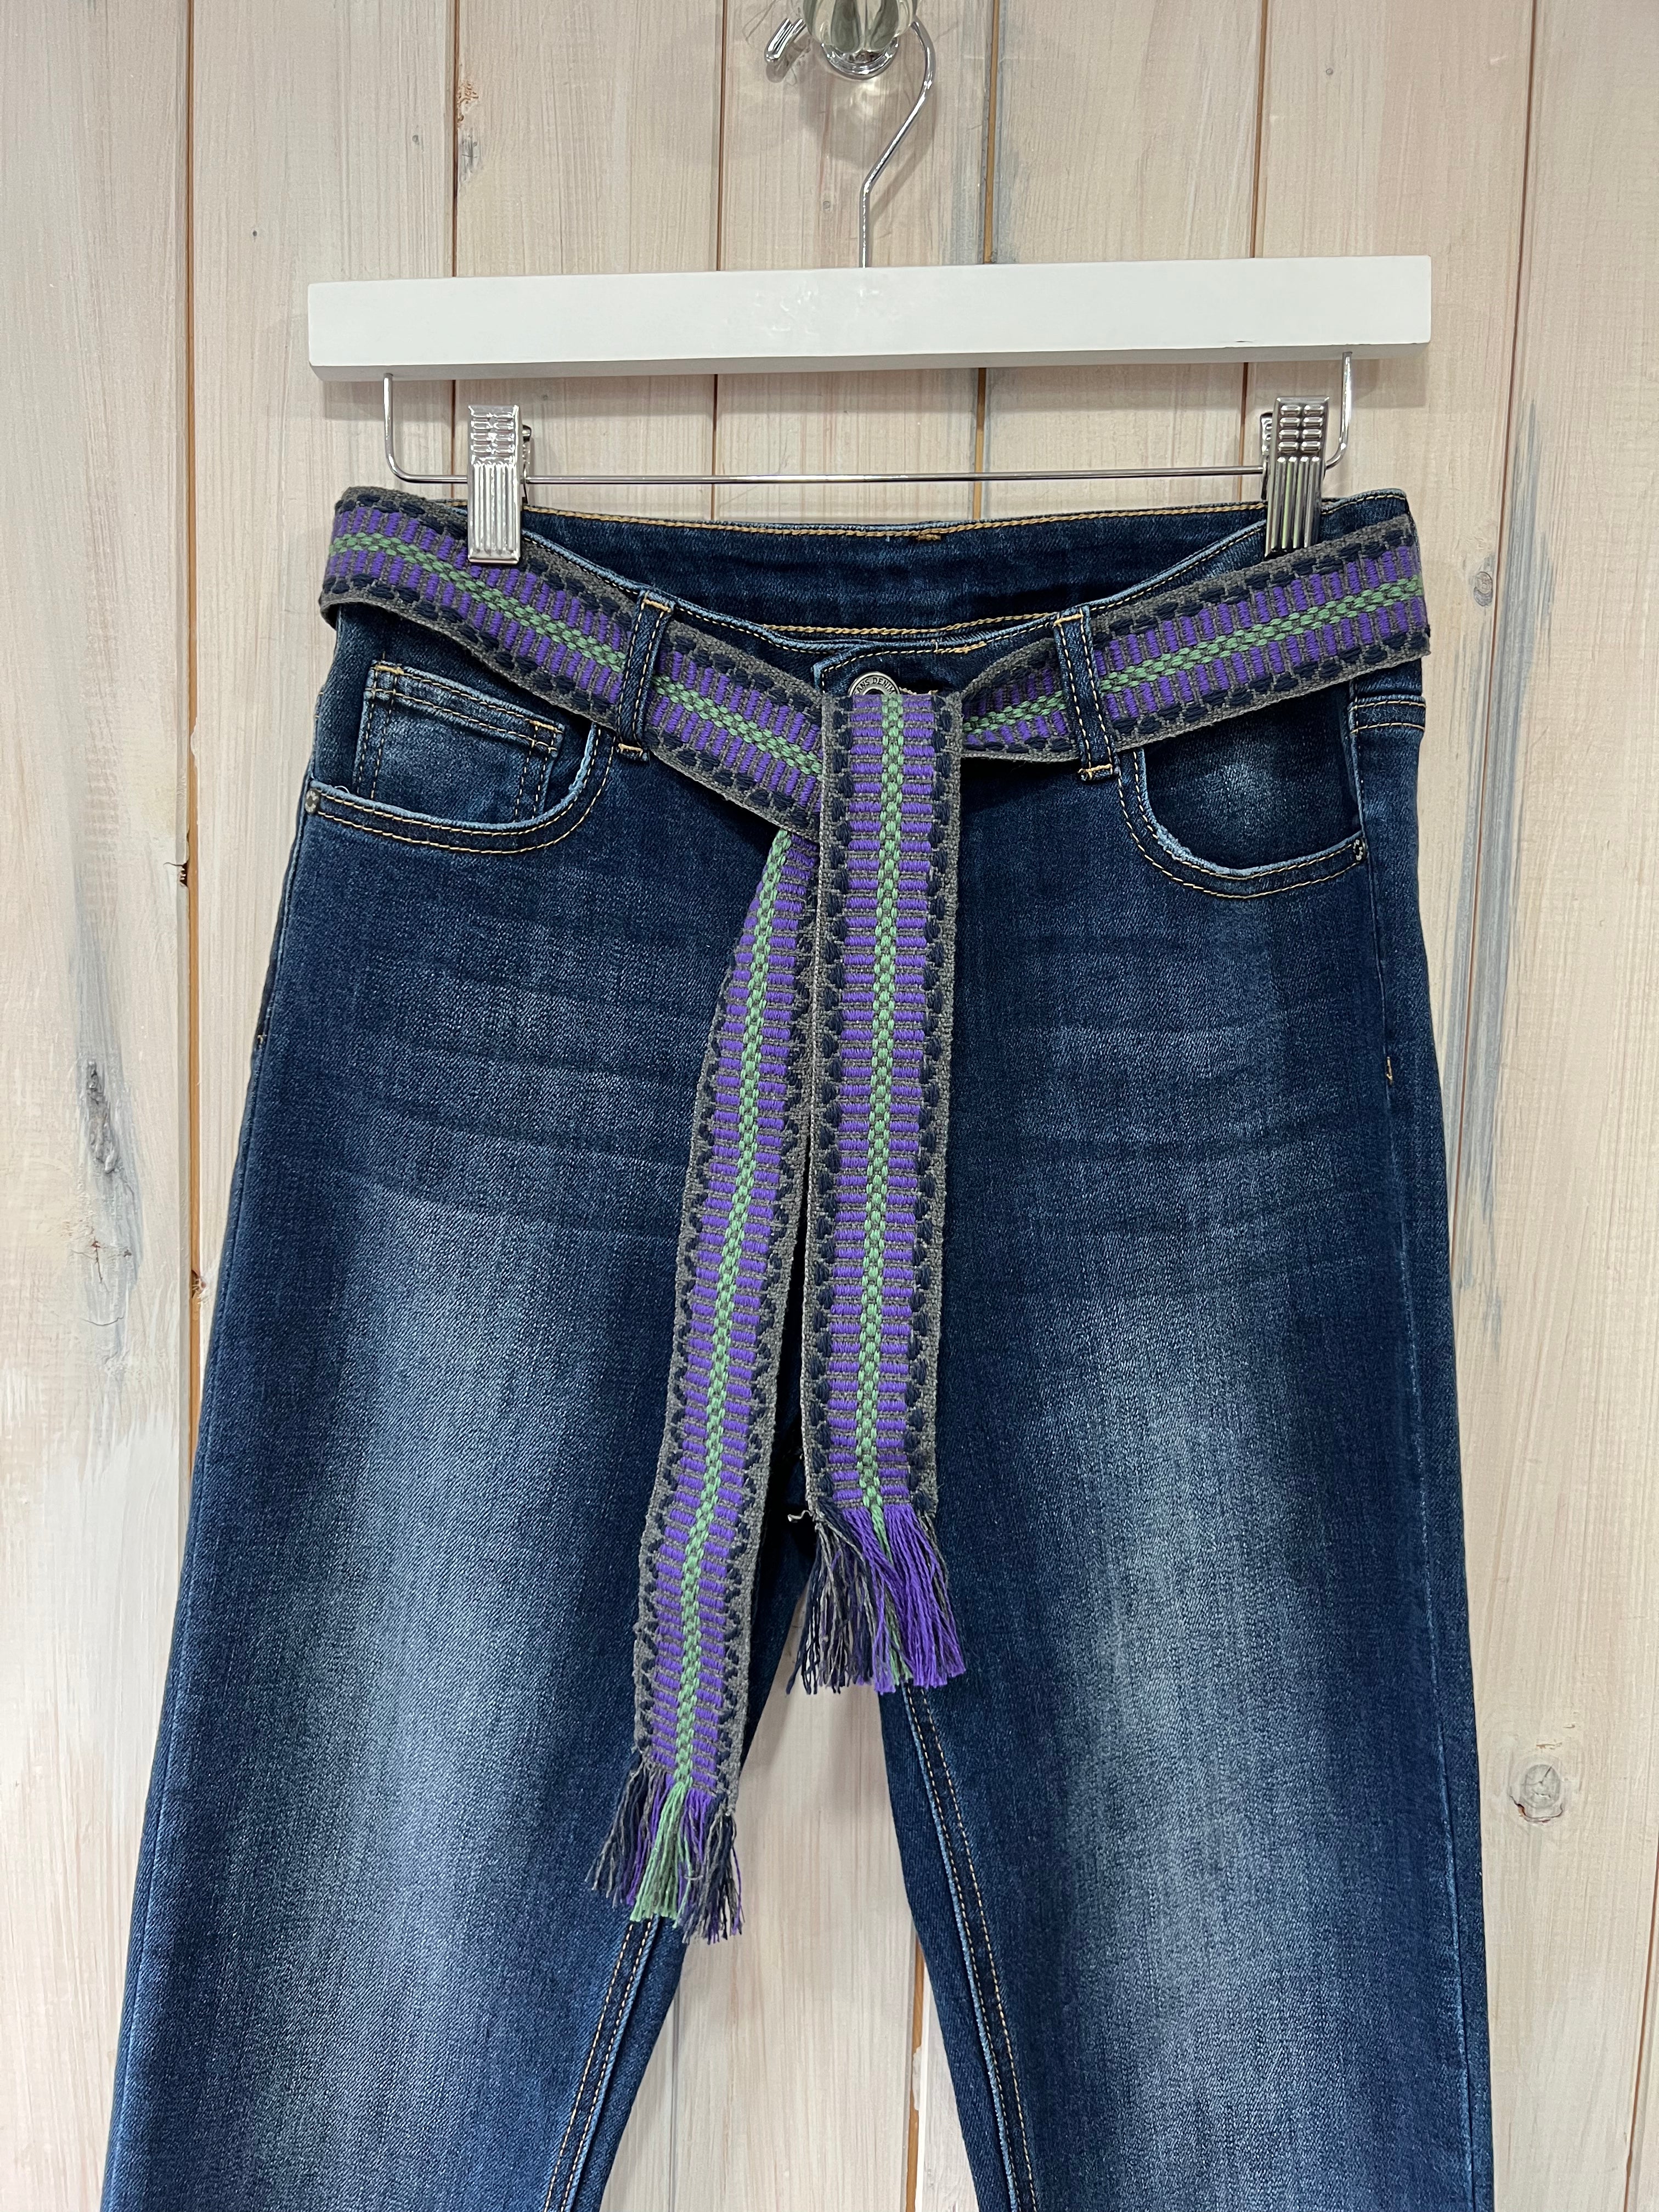 Tennessee Woven Belt - 4 Colours. - New Collection